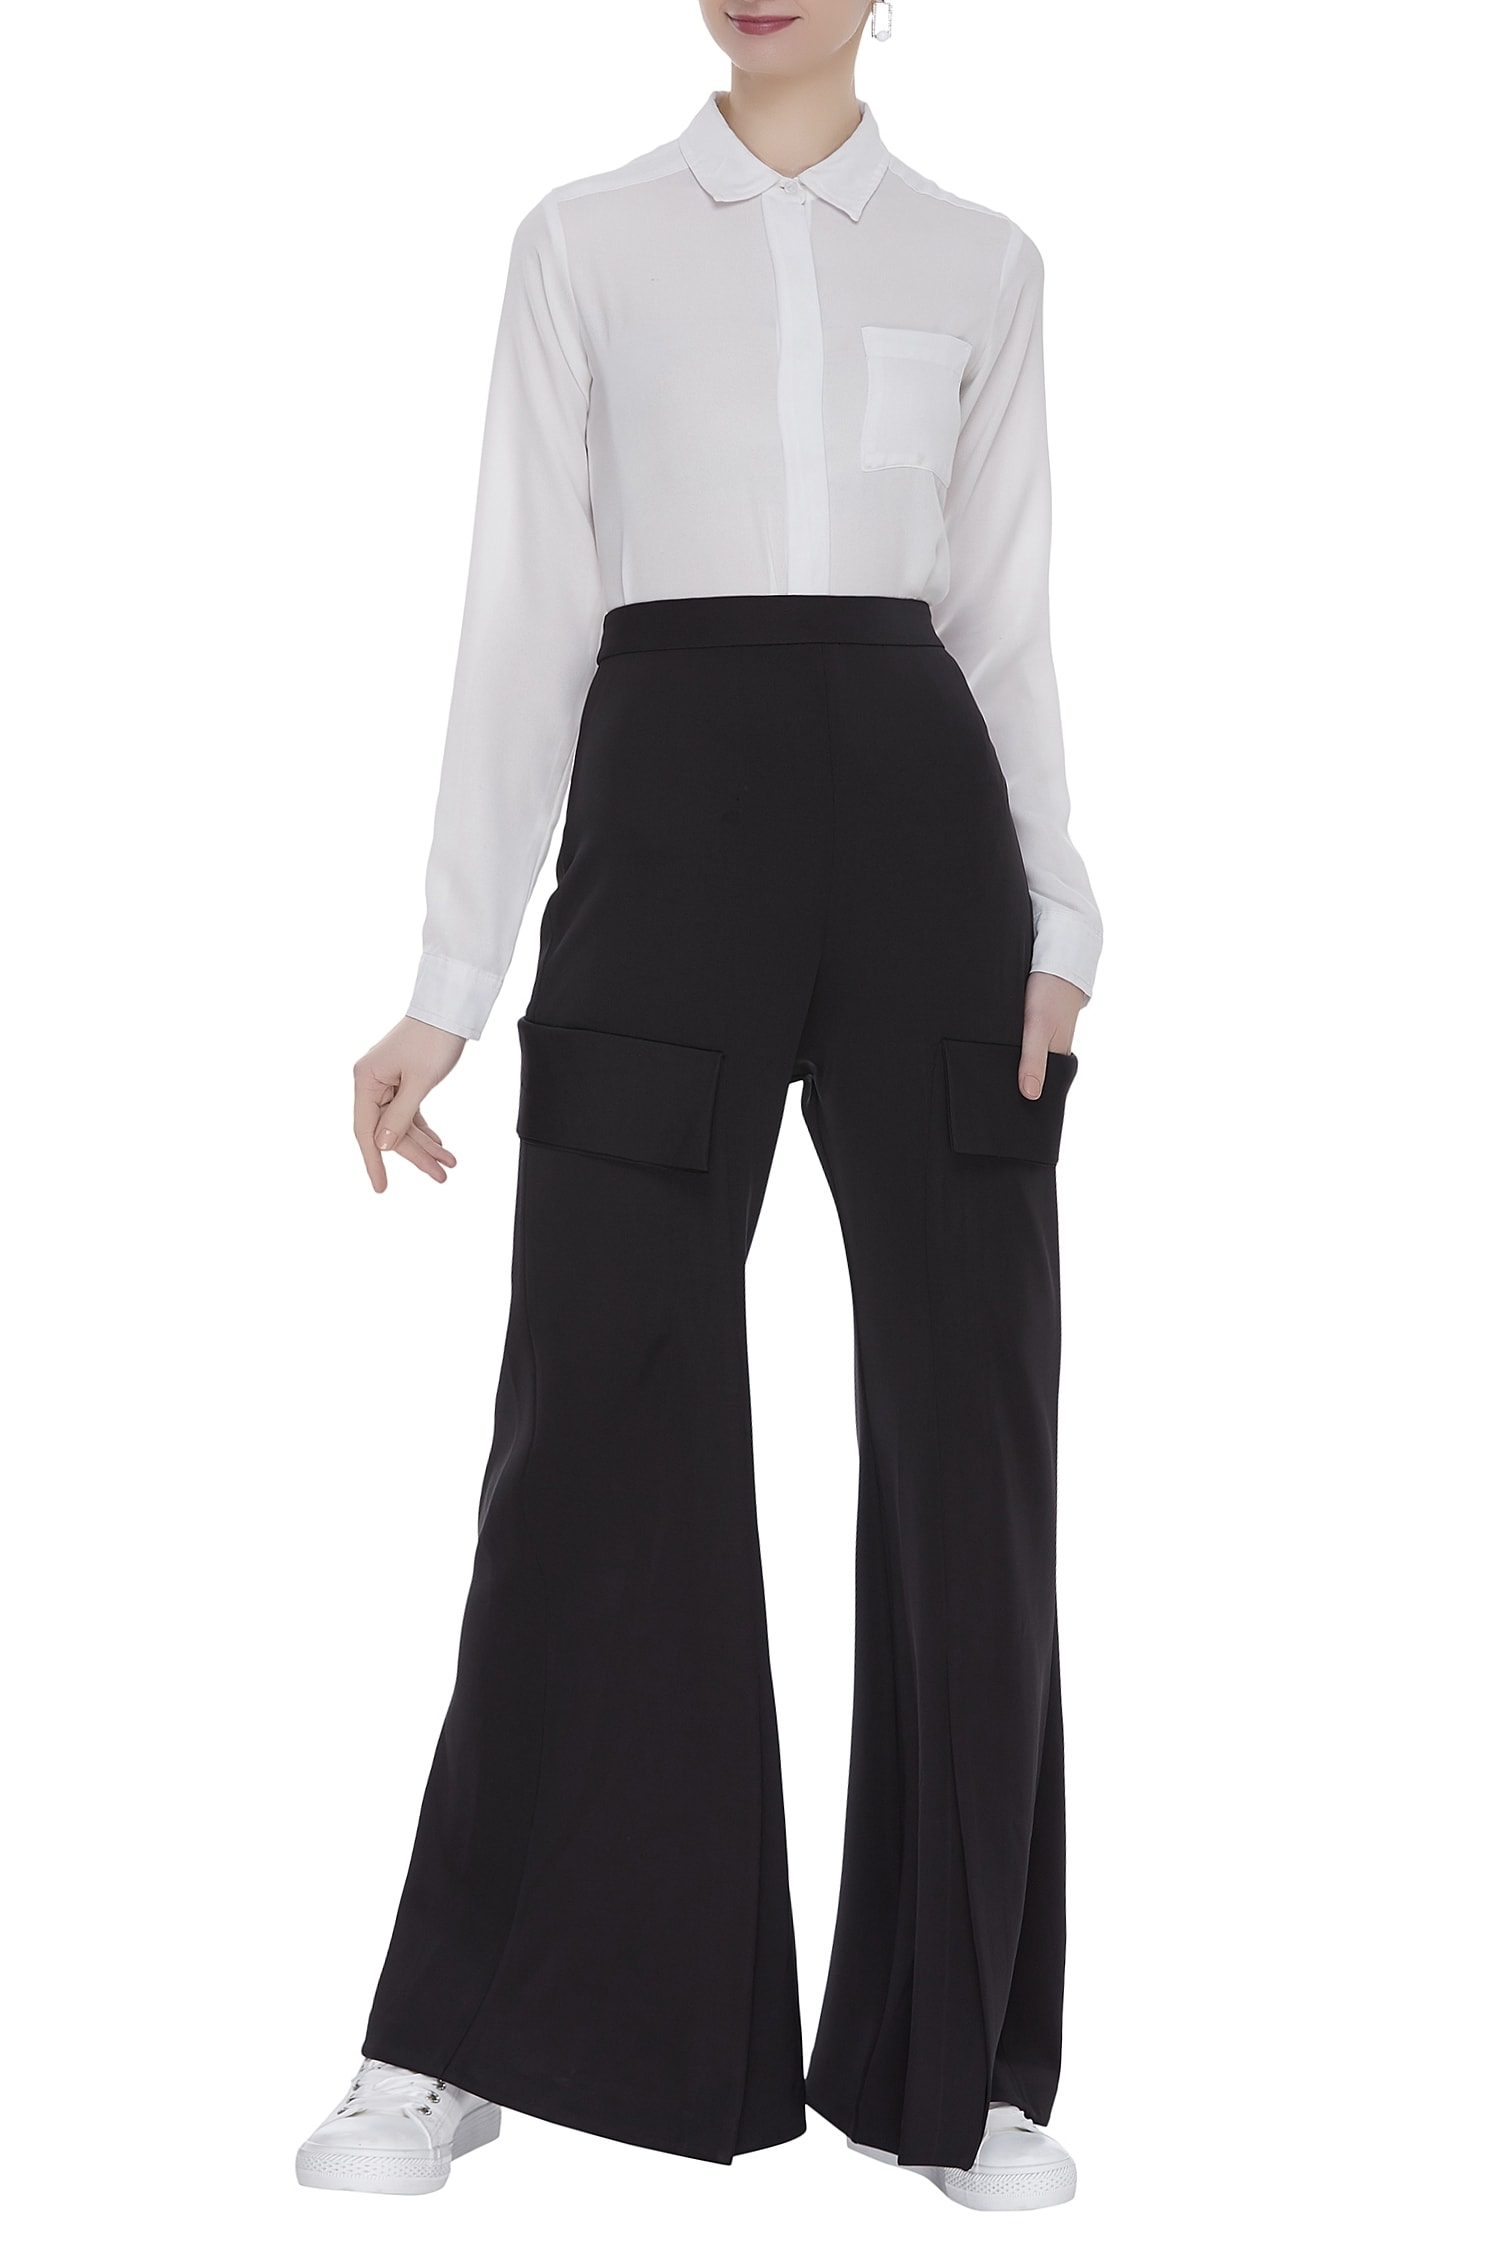 Buy Notebook Black Flared Pants With Side Pocket Online | Aza Fashions